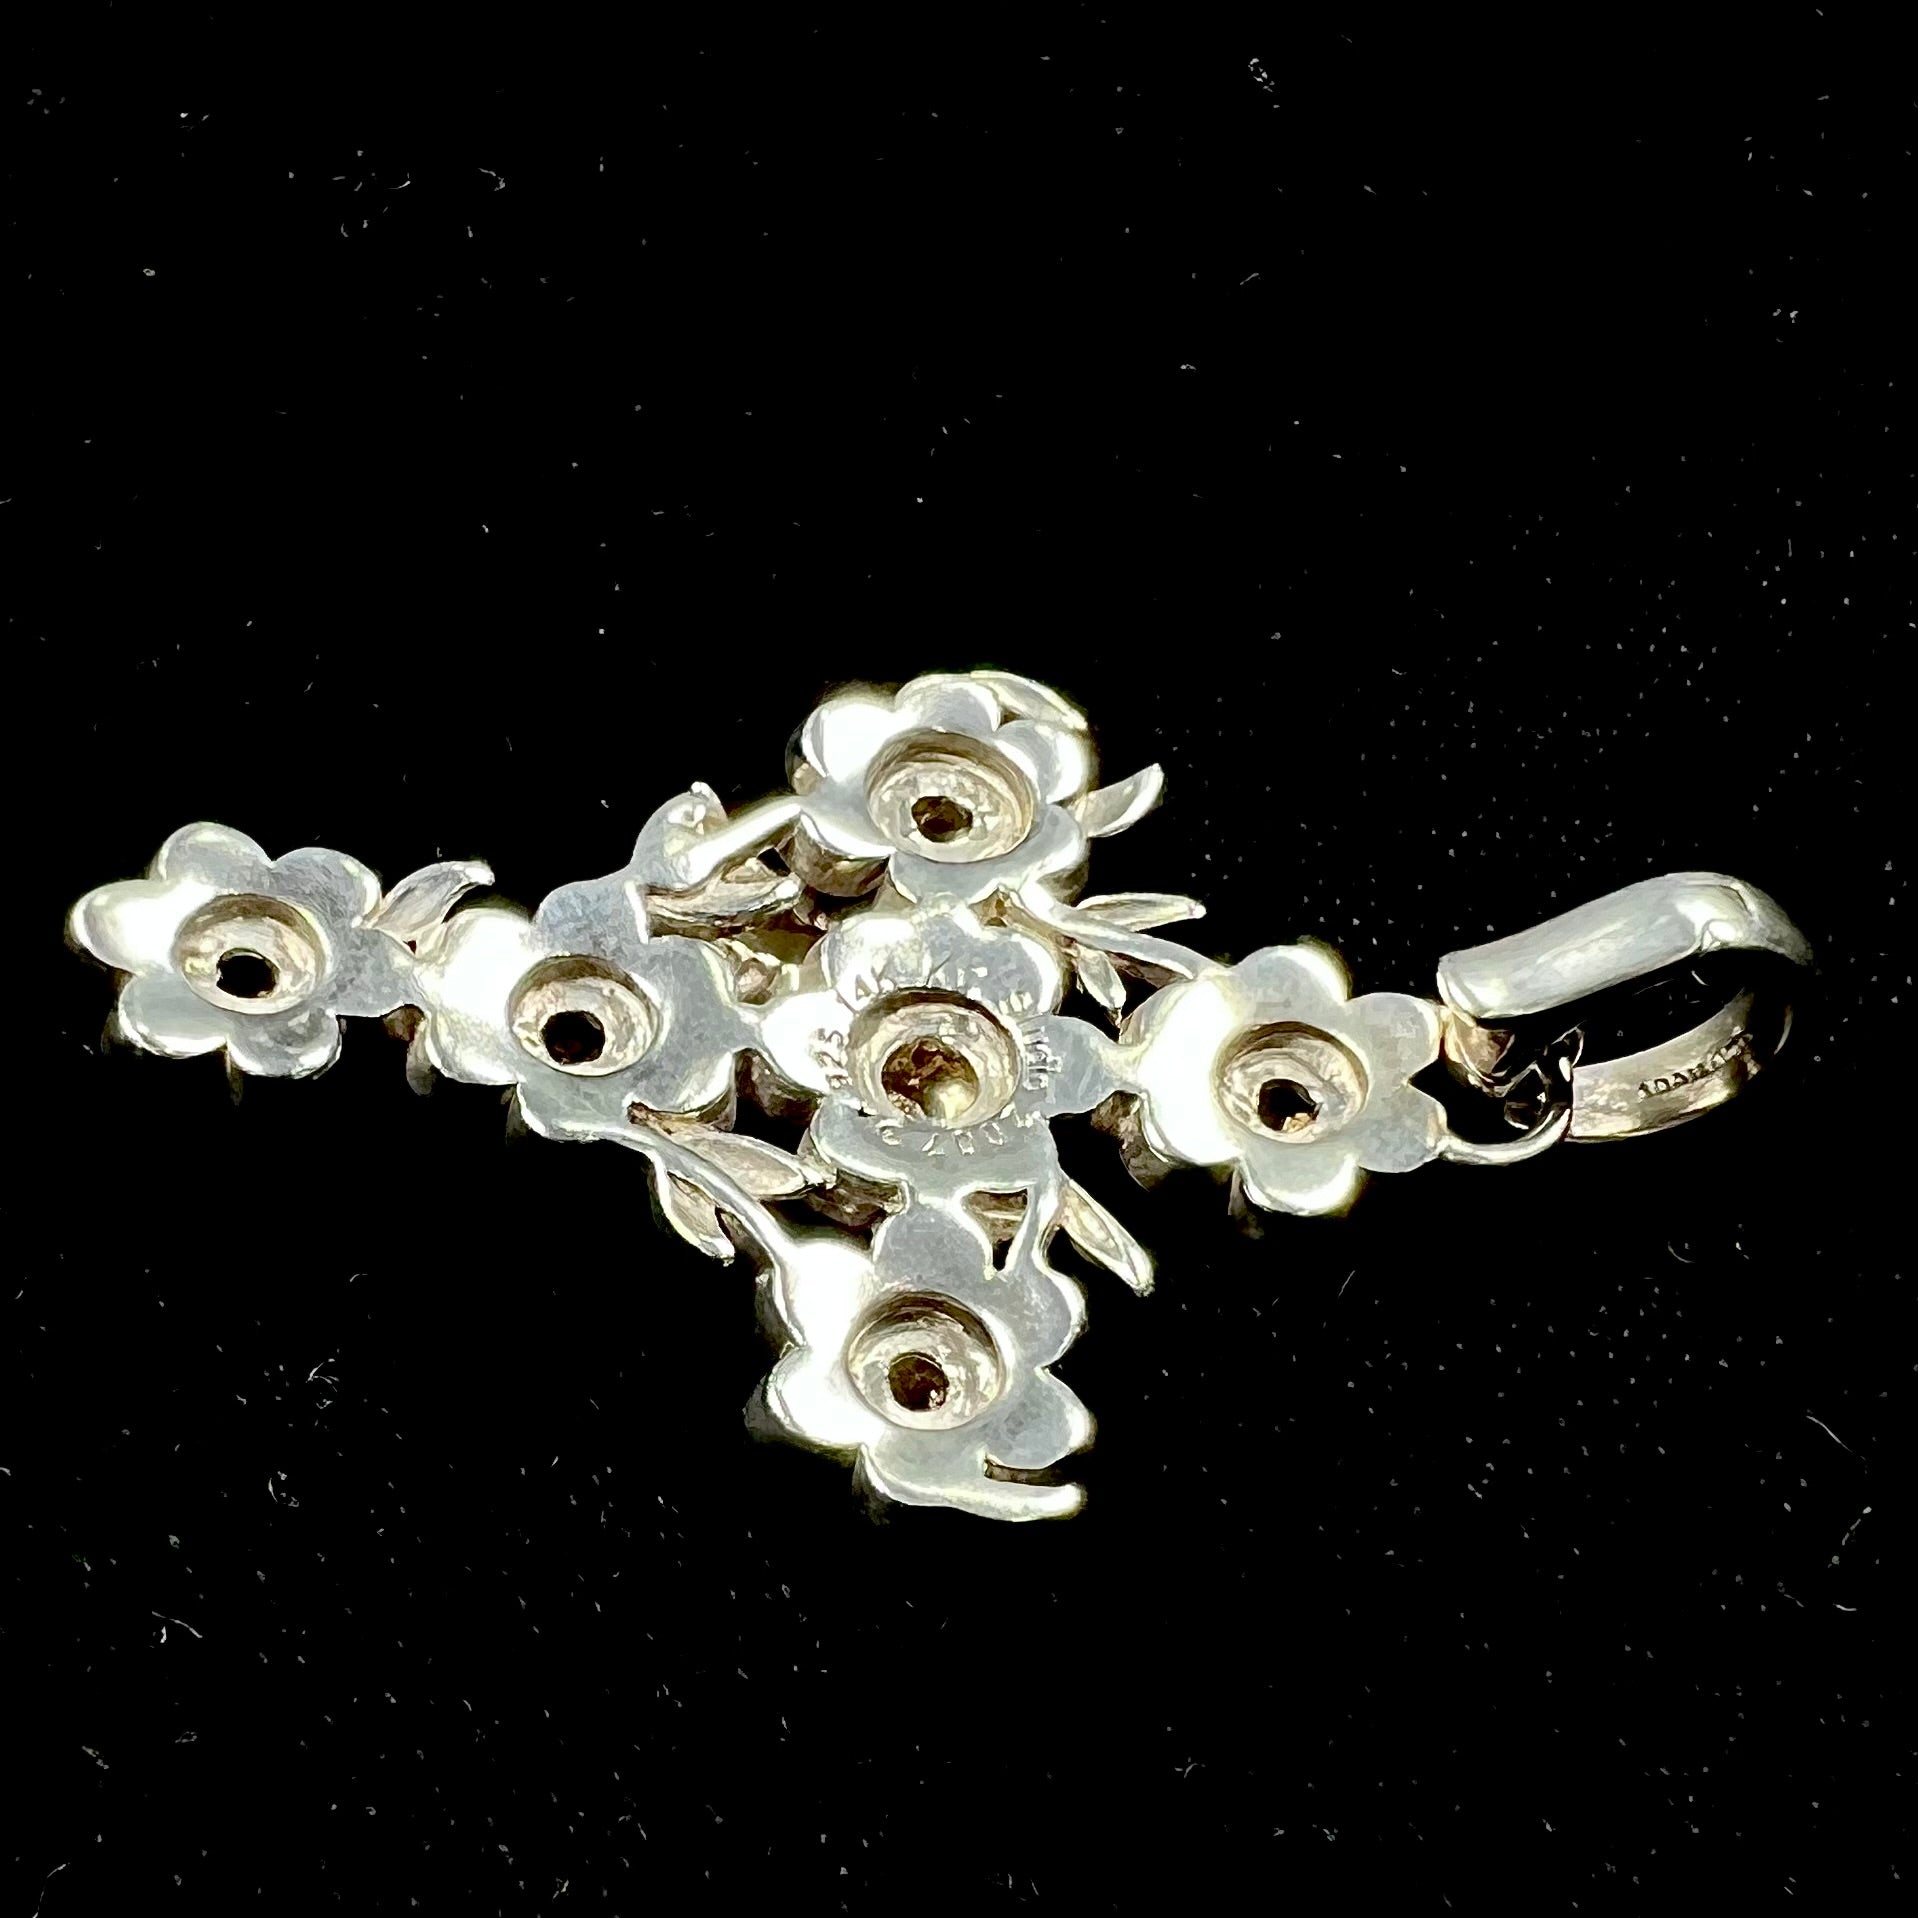 A cross pendant with floral decoration.  The cross is made of six  flowers with sterling silver petals and yellow gold nectar.  A silver bee is on one of the pendants.  The bail opens and closes.